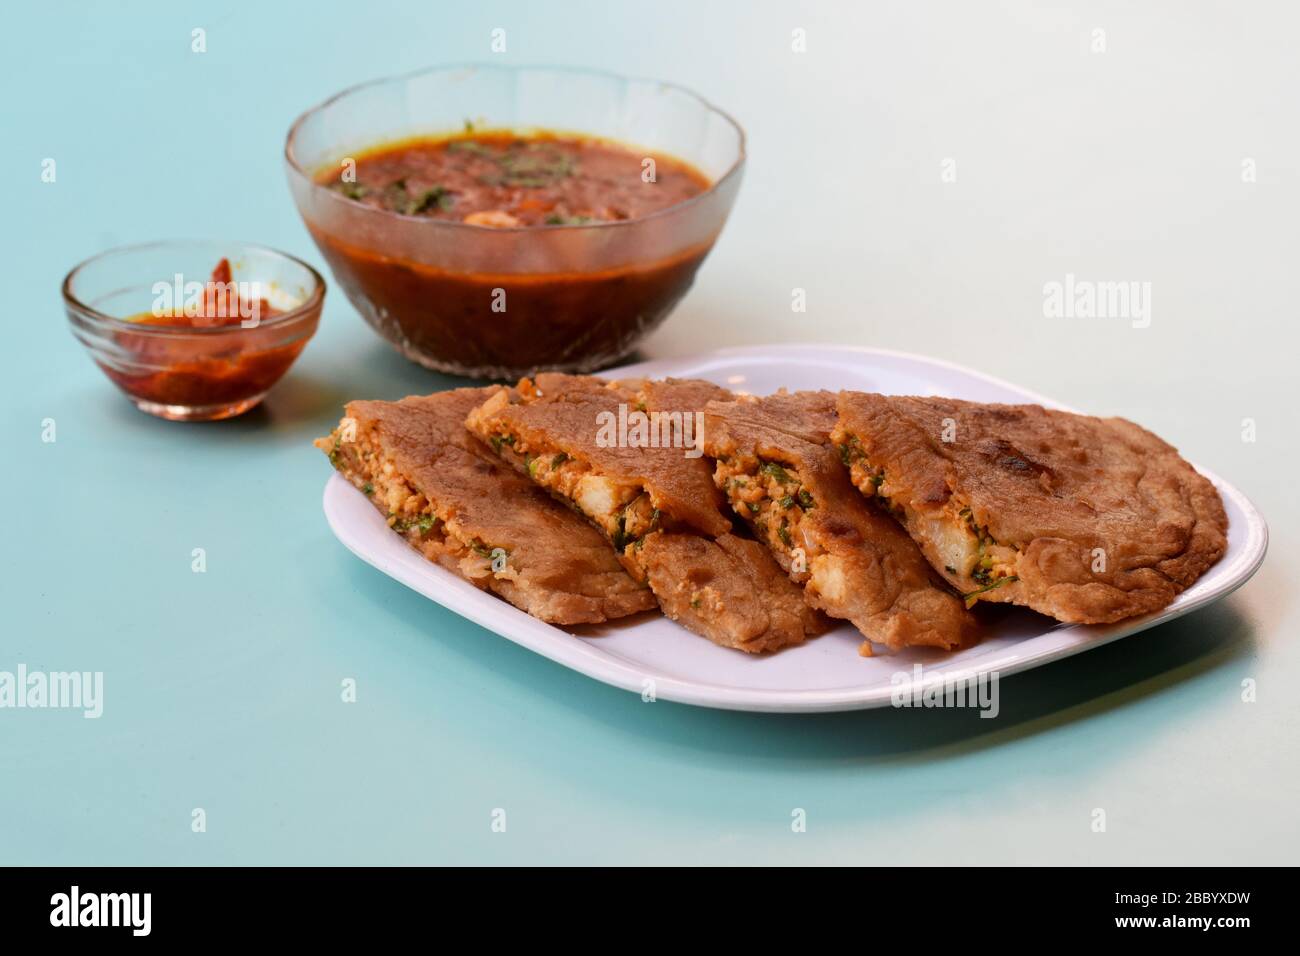 Indian flatbread - Aloo Kulcha with Choley or Stuffed Potato Bread or Stuffed Aloo paratha with tomato ketchup, white chickpeas & pickle - Image. Stock Photo